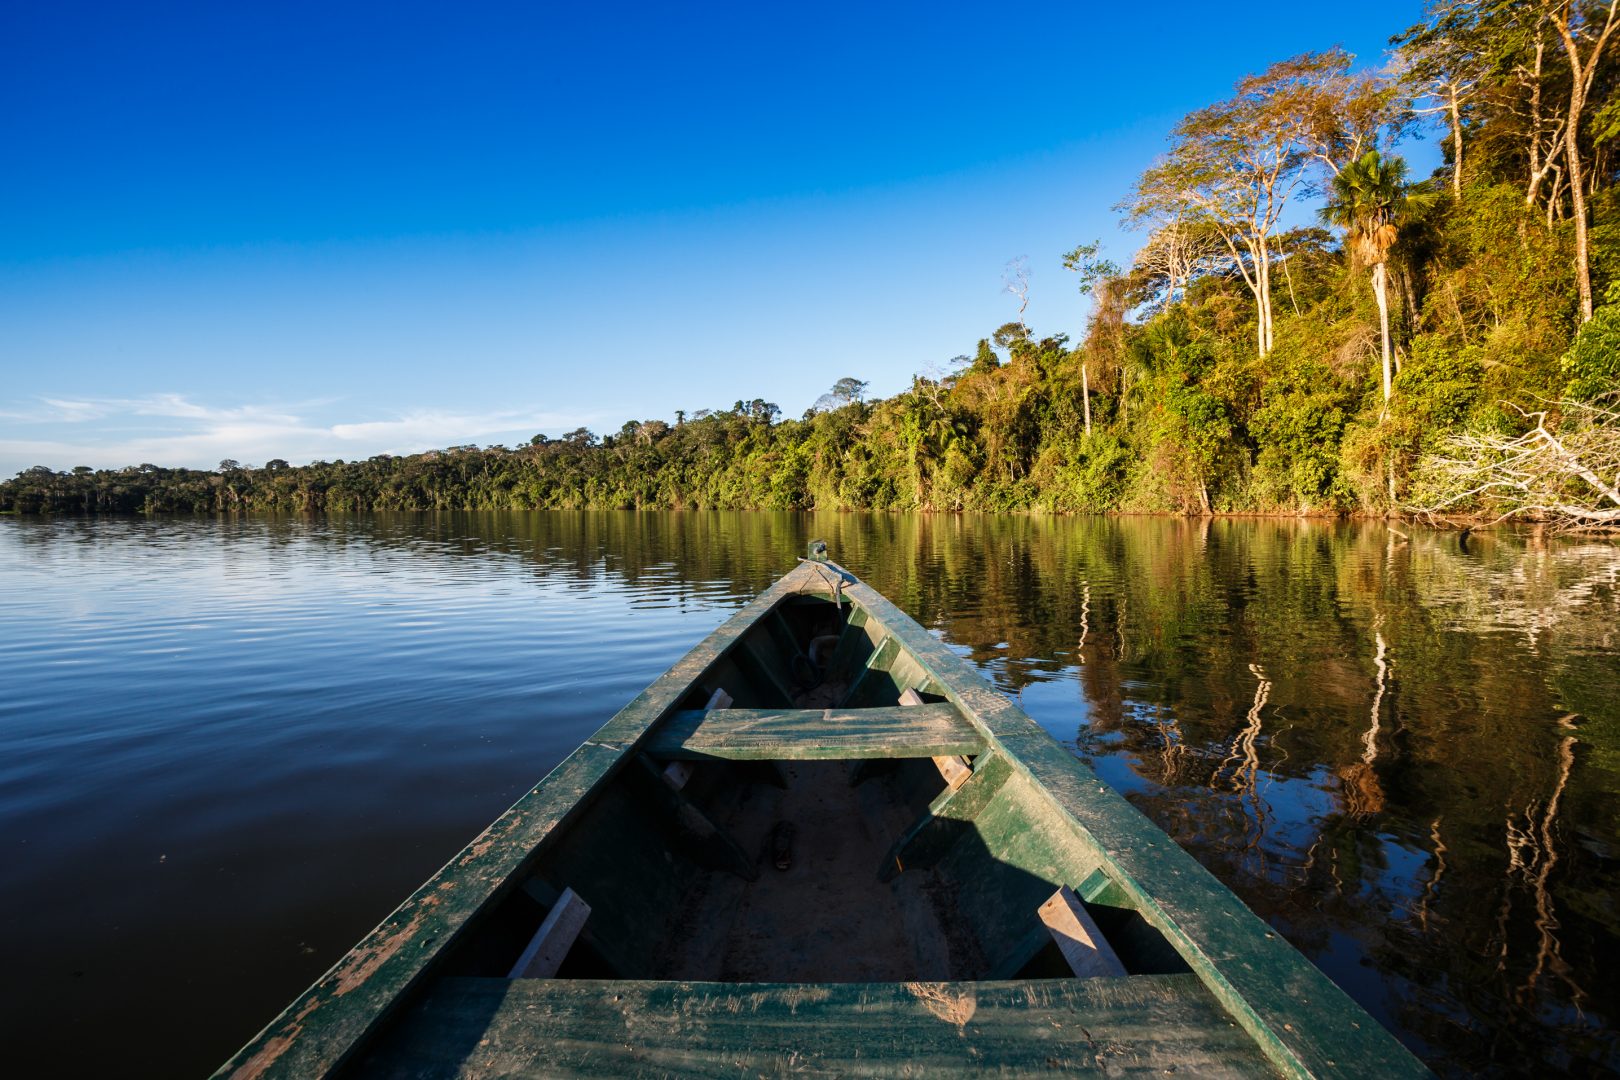 Boat floating on the Amazon river